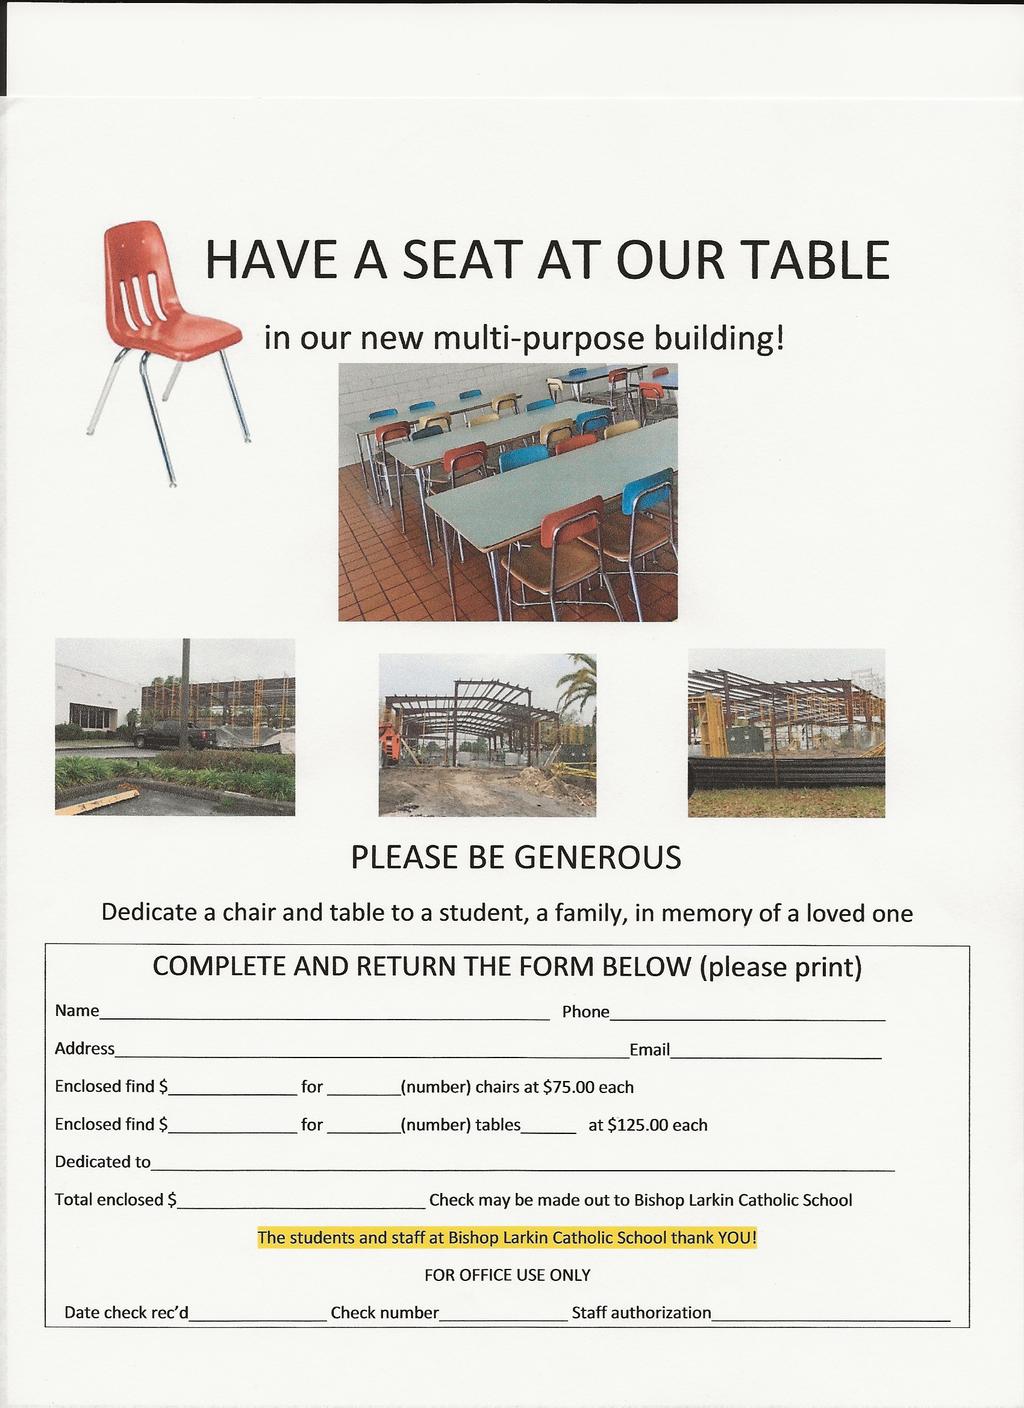 MAY 27, 2018 ST. JAMES THE APOSTLE CATHOLIC CHURCH HOLY TRINITY BISHOP LARKIN INVITES YOU TO HAVE A SEAT! We are offering you a seat at our table in our new multi-purpose building.